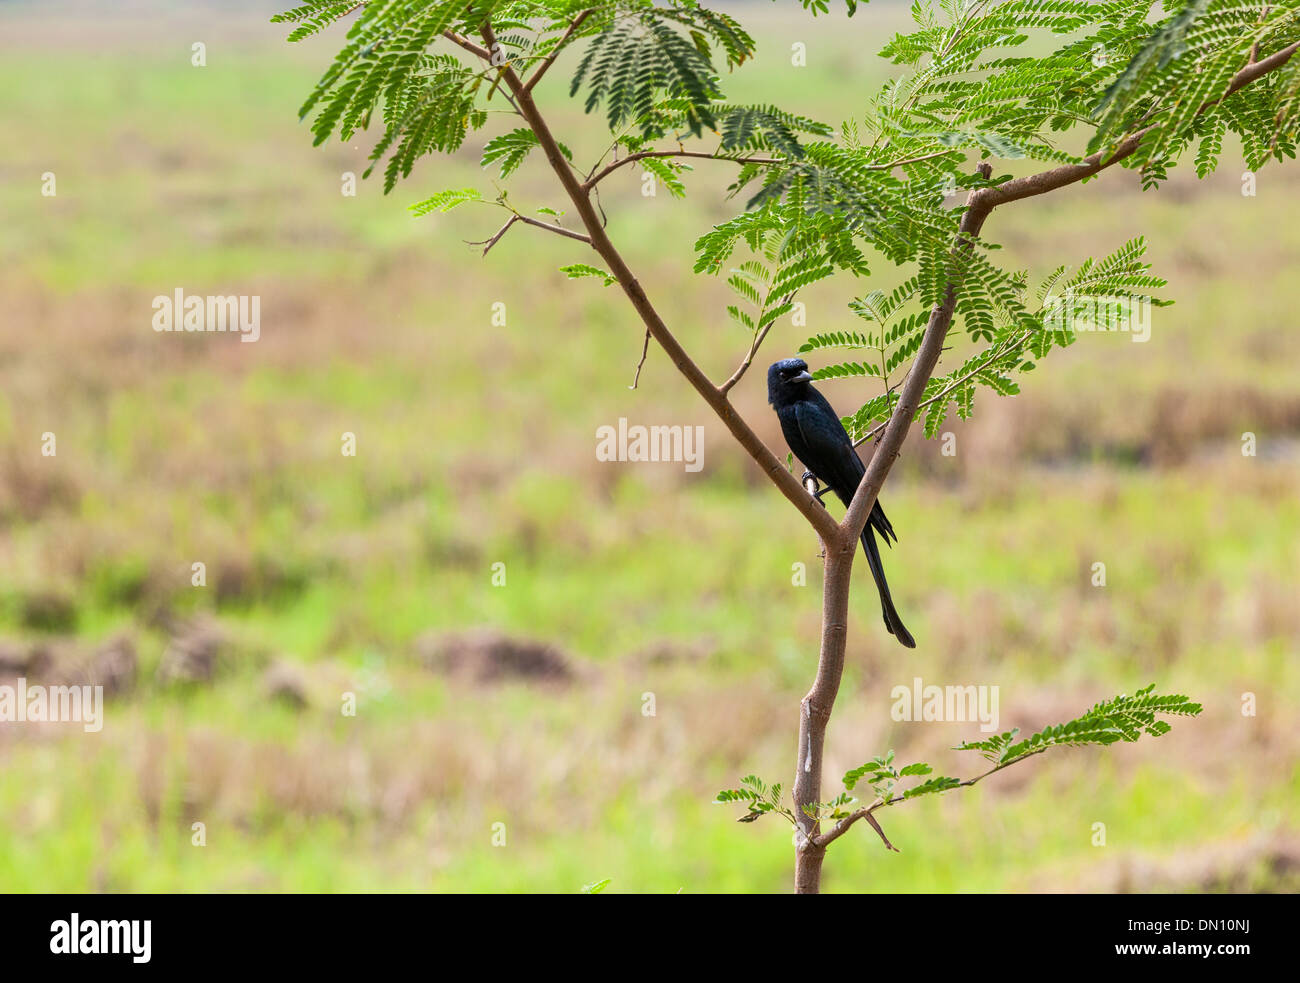 The konings drongo is a songbird species from the family of the Drongo's from the genus Dicrurus. Previously, this species was c Stock Photo